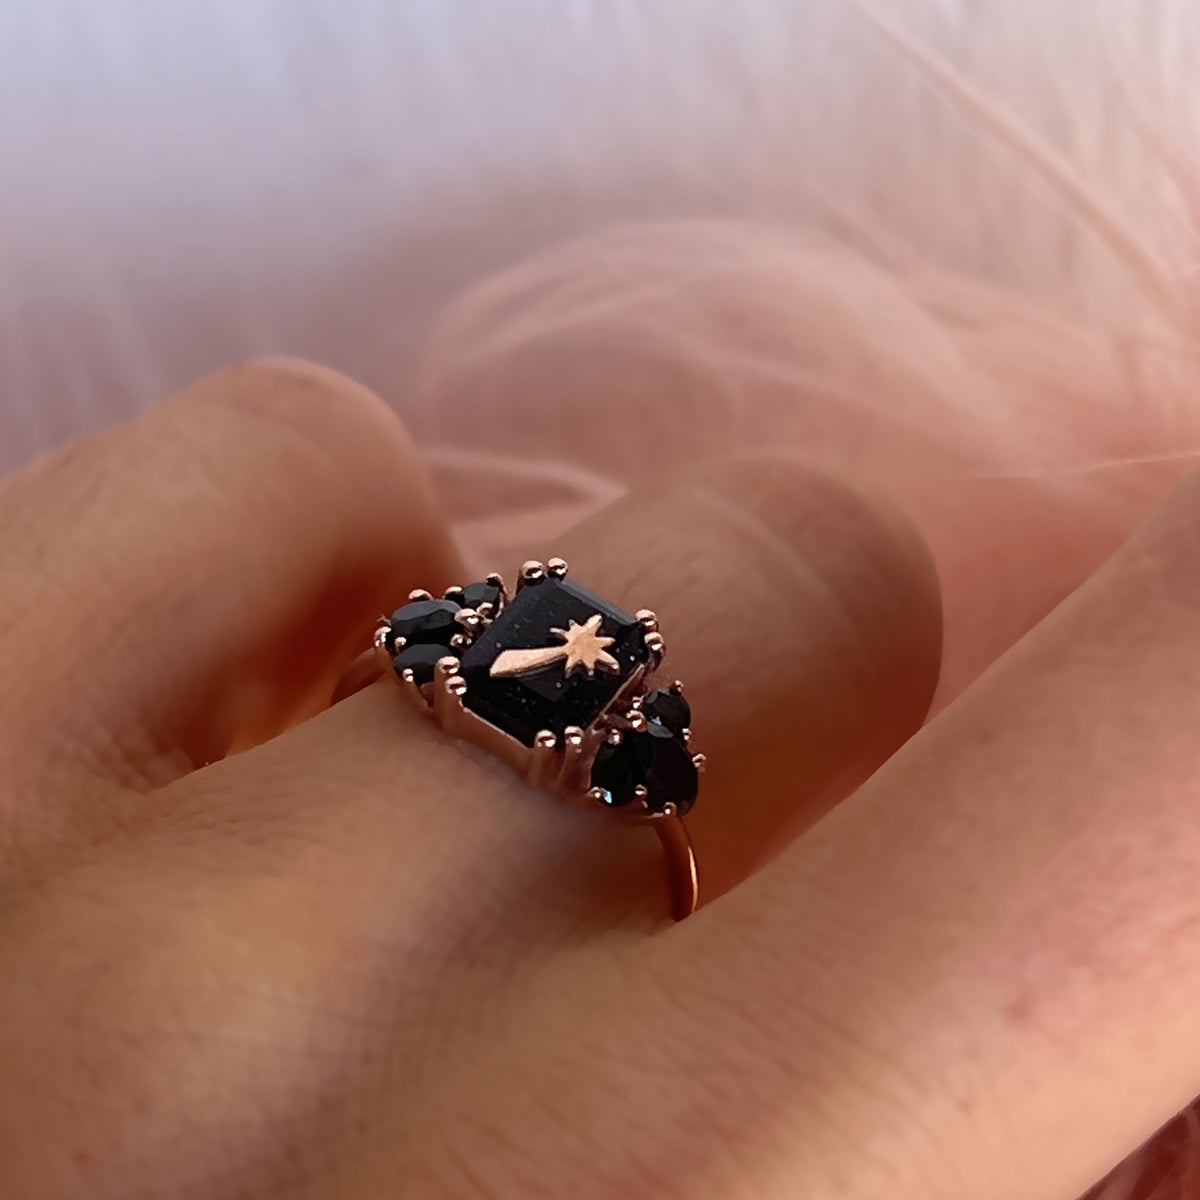 Rose Gold Sunstone & Black Onyx Wish Upon A Shooting Star Ring